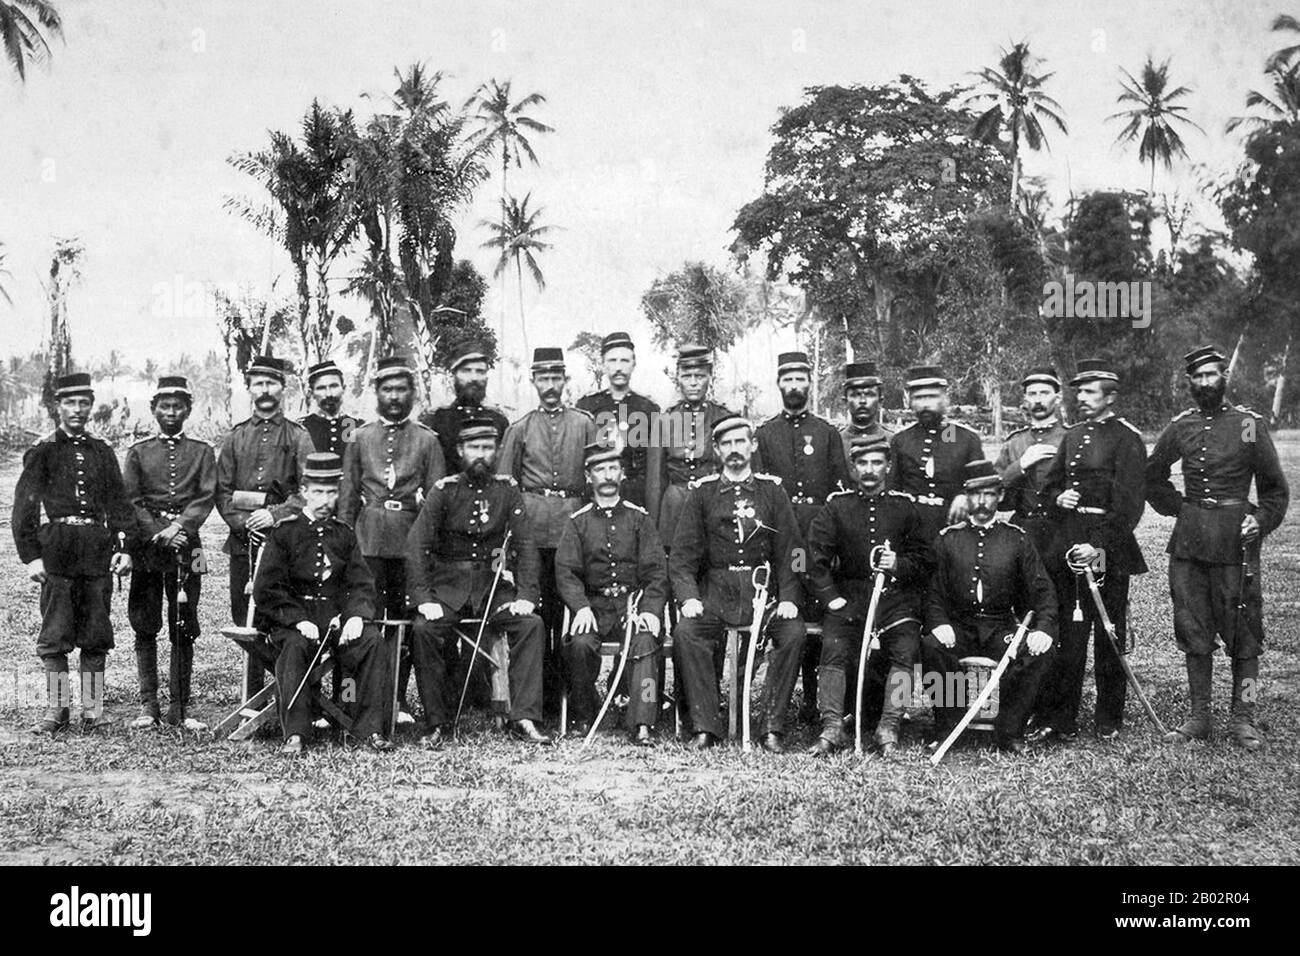 The Aceh War, also known as the Dutch War or the Infidel War (1873–1914), was an armed military conflict between the Sultanate of Aceh and the Netherlands which was triggered by discussions between representatives of Aceh and the United Kingdom in Singapore during early 1873.  The war was part of a series of conflicts in the late 19th century that consolidated Dutch rule over modern-day Indonesia. Stock Photo